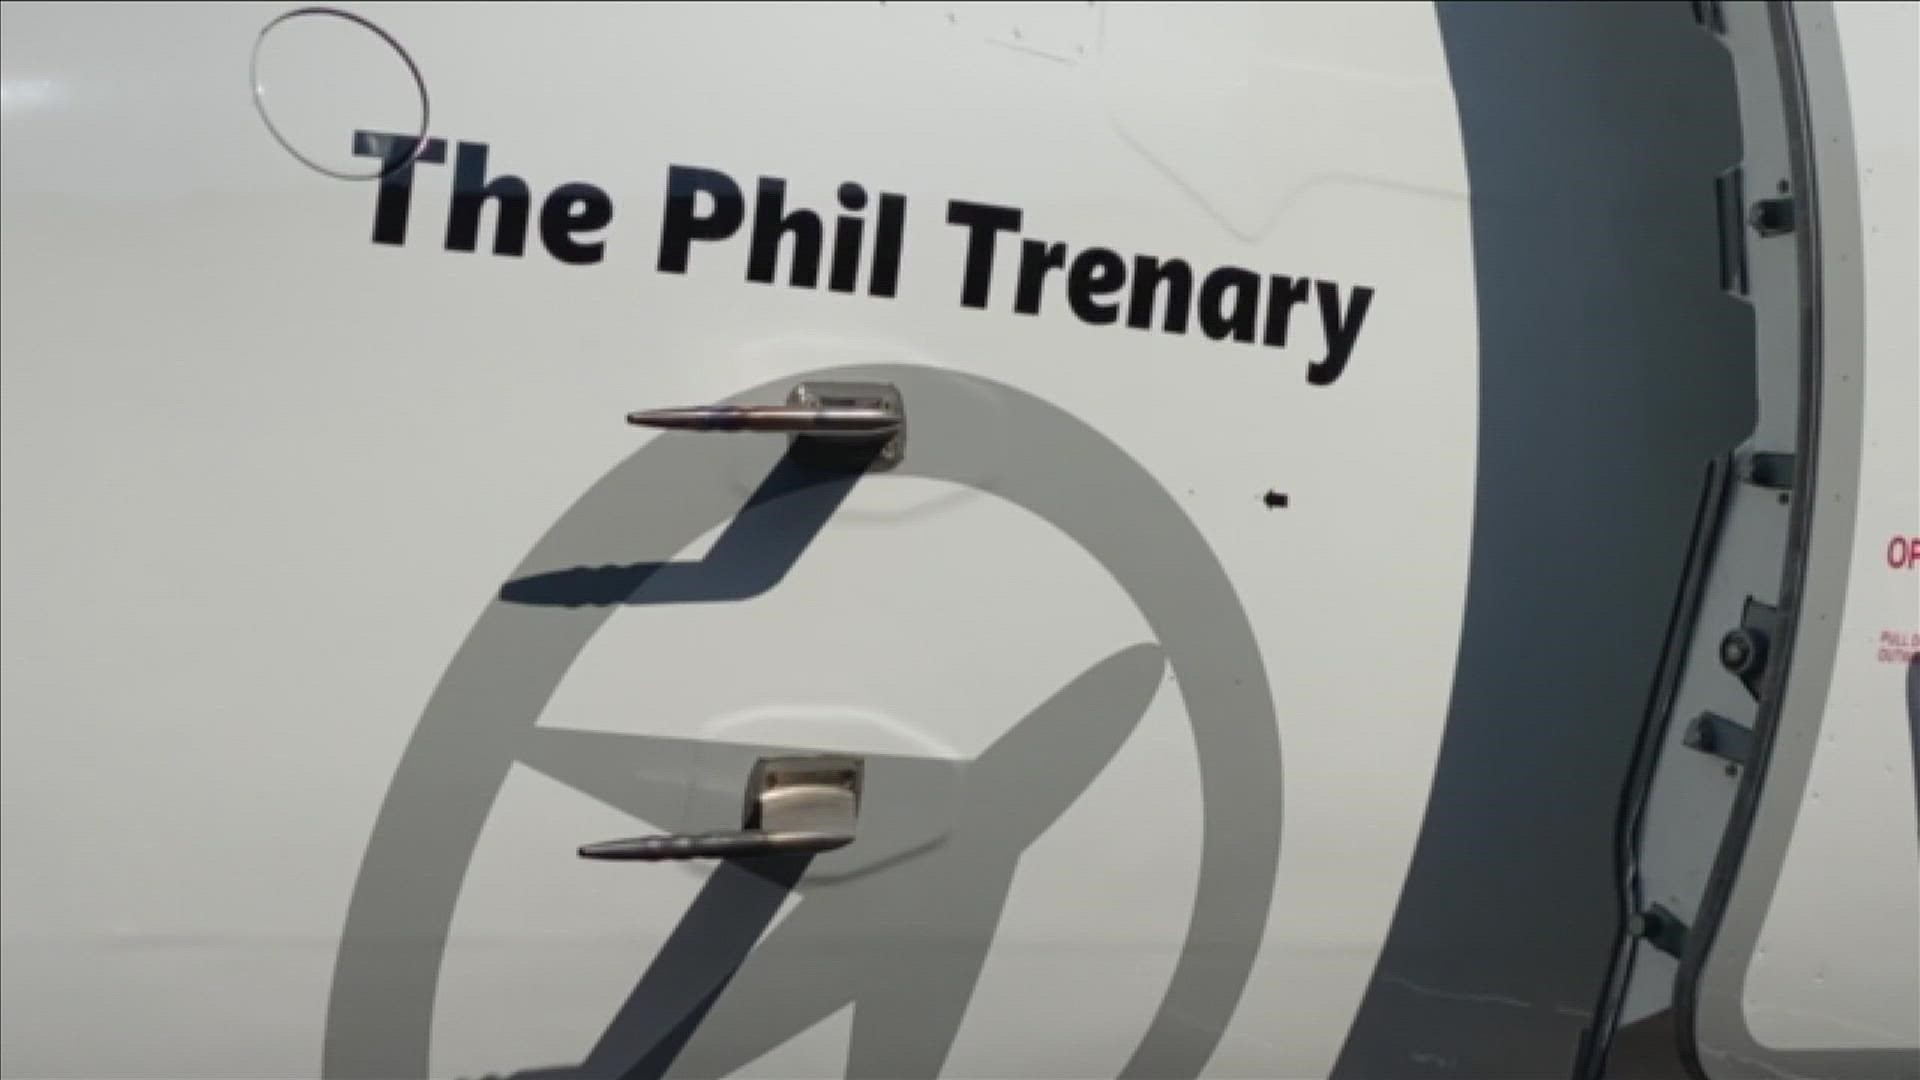 "We thought this would be the most fitting tribute - that we could have is a plane that was operated by Phil Trenary, named the Phil Trenary,” said CEO Stan Little.